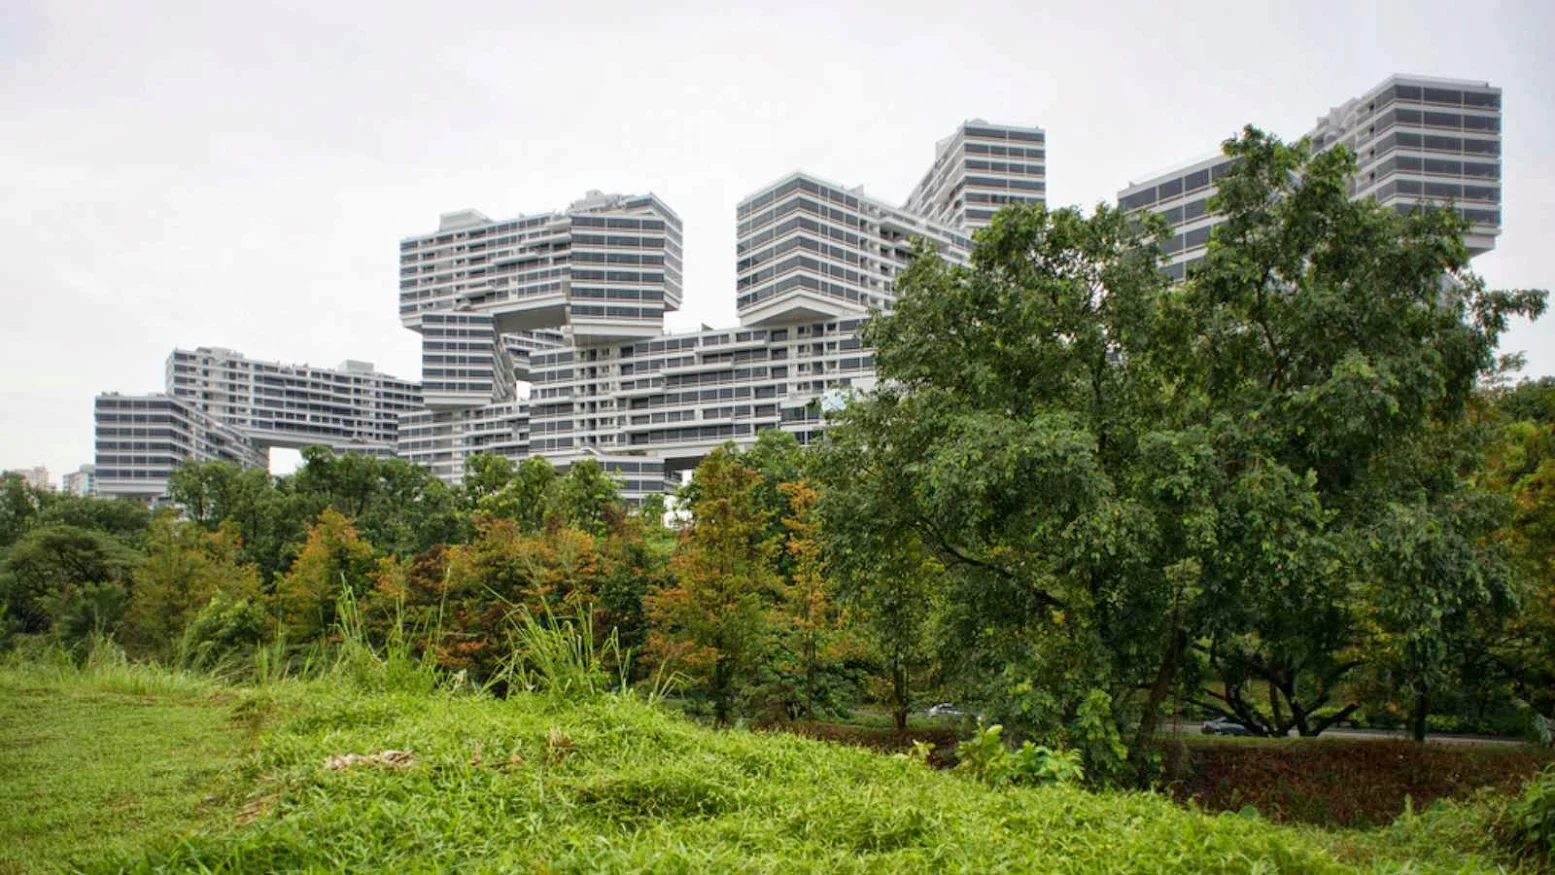 The Interlace by OMA